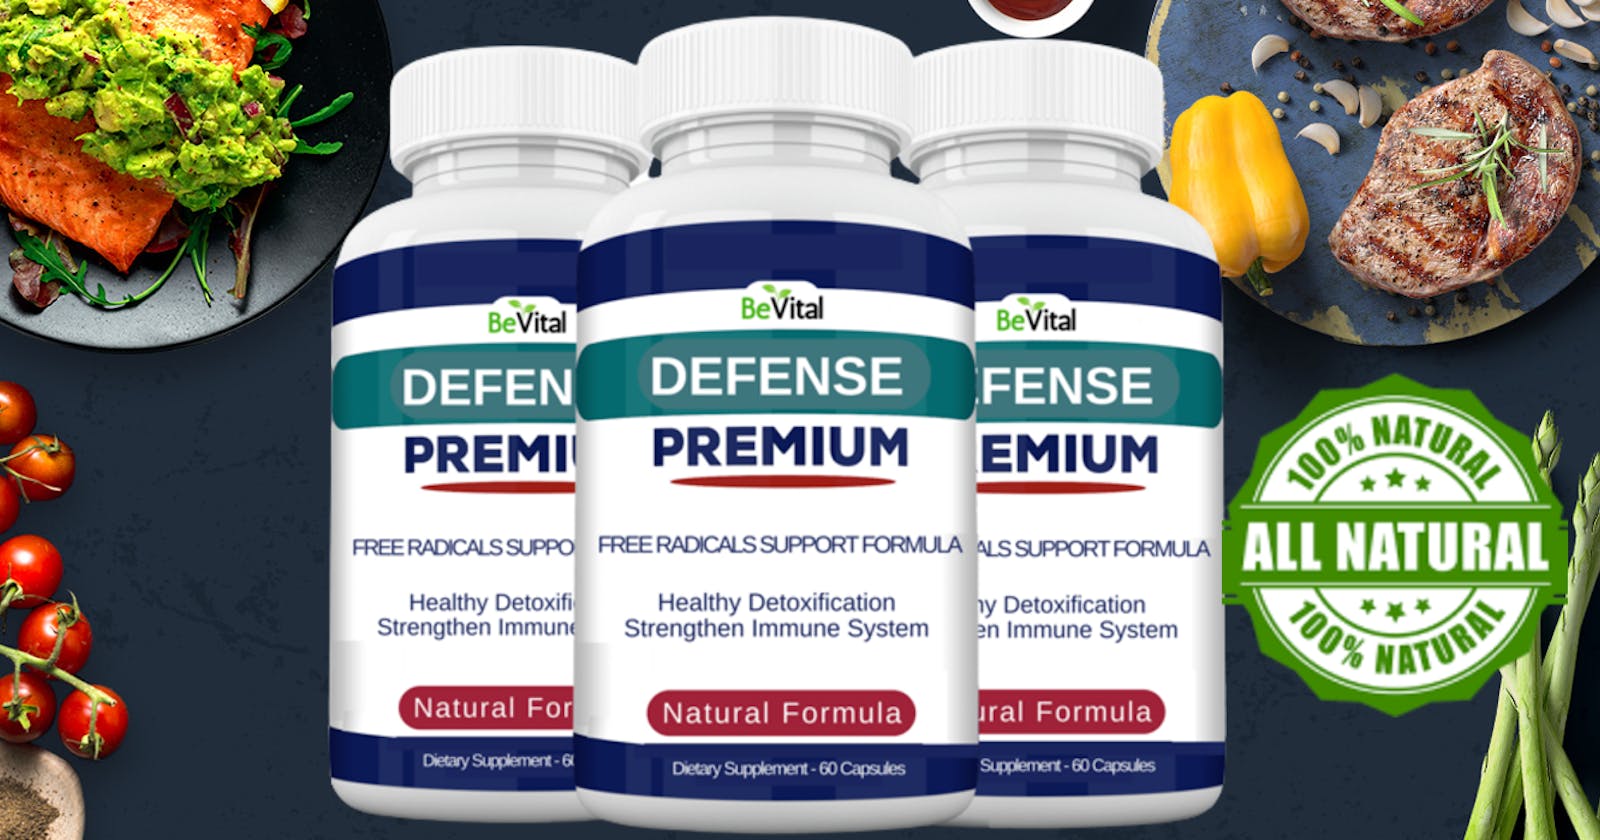 BeVital Defense Premium {Clinically Proven} Get Rid From Fatigue Joint & Muscle Aches Memory Impairment(Work Or Hoax)